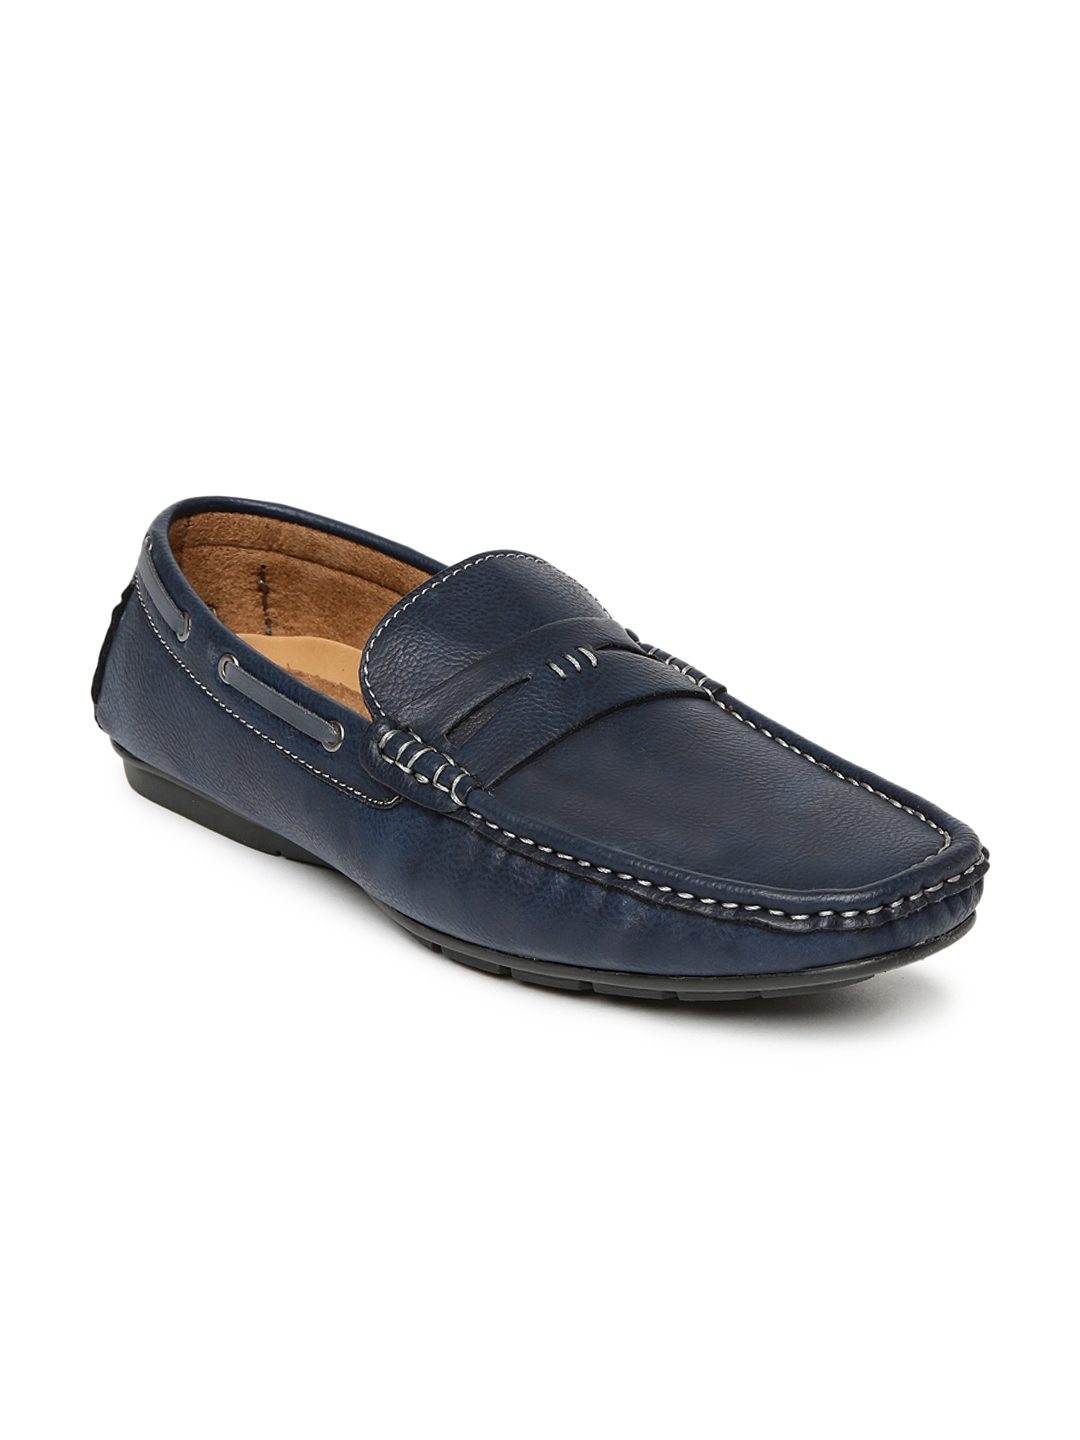 Buy Bata Men Navy Loafers - Casual Shoes for Men 1312801 | Myntra